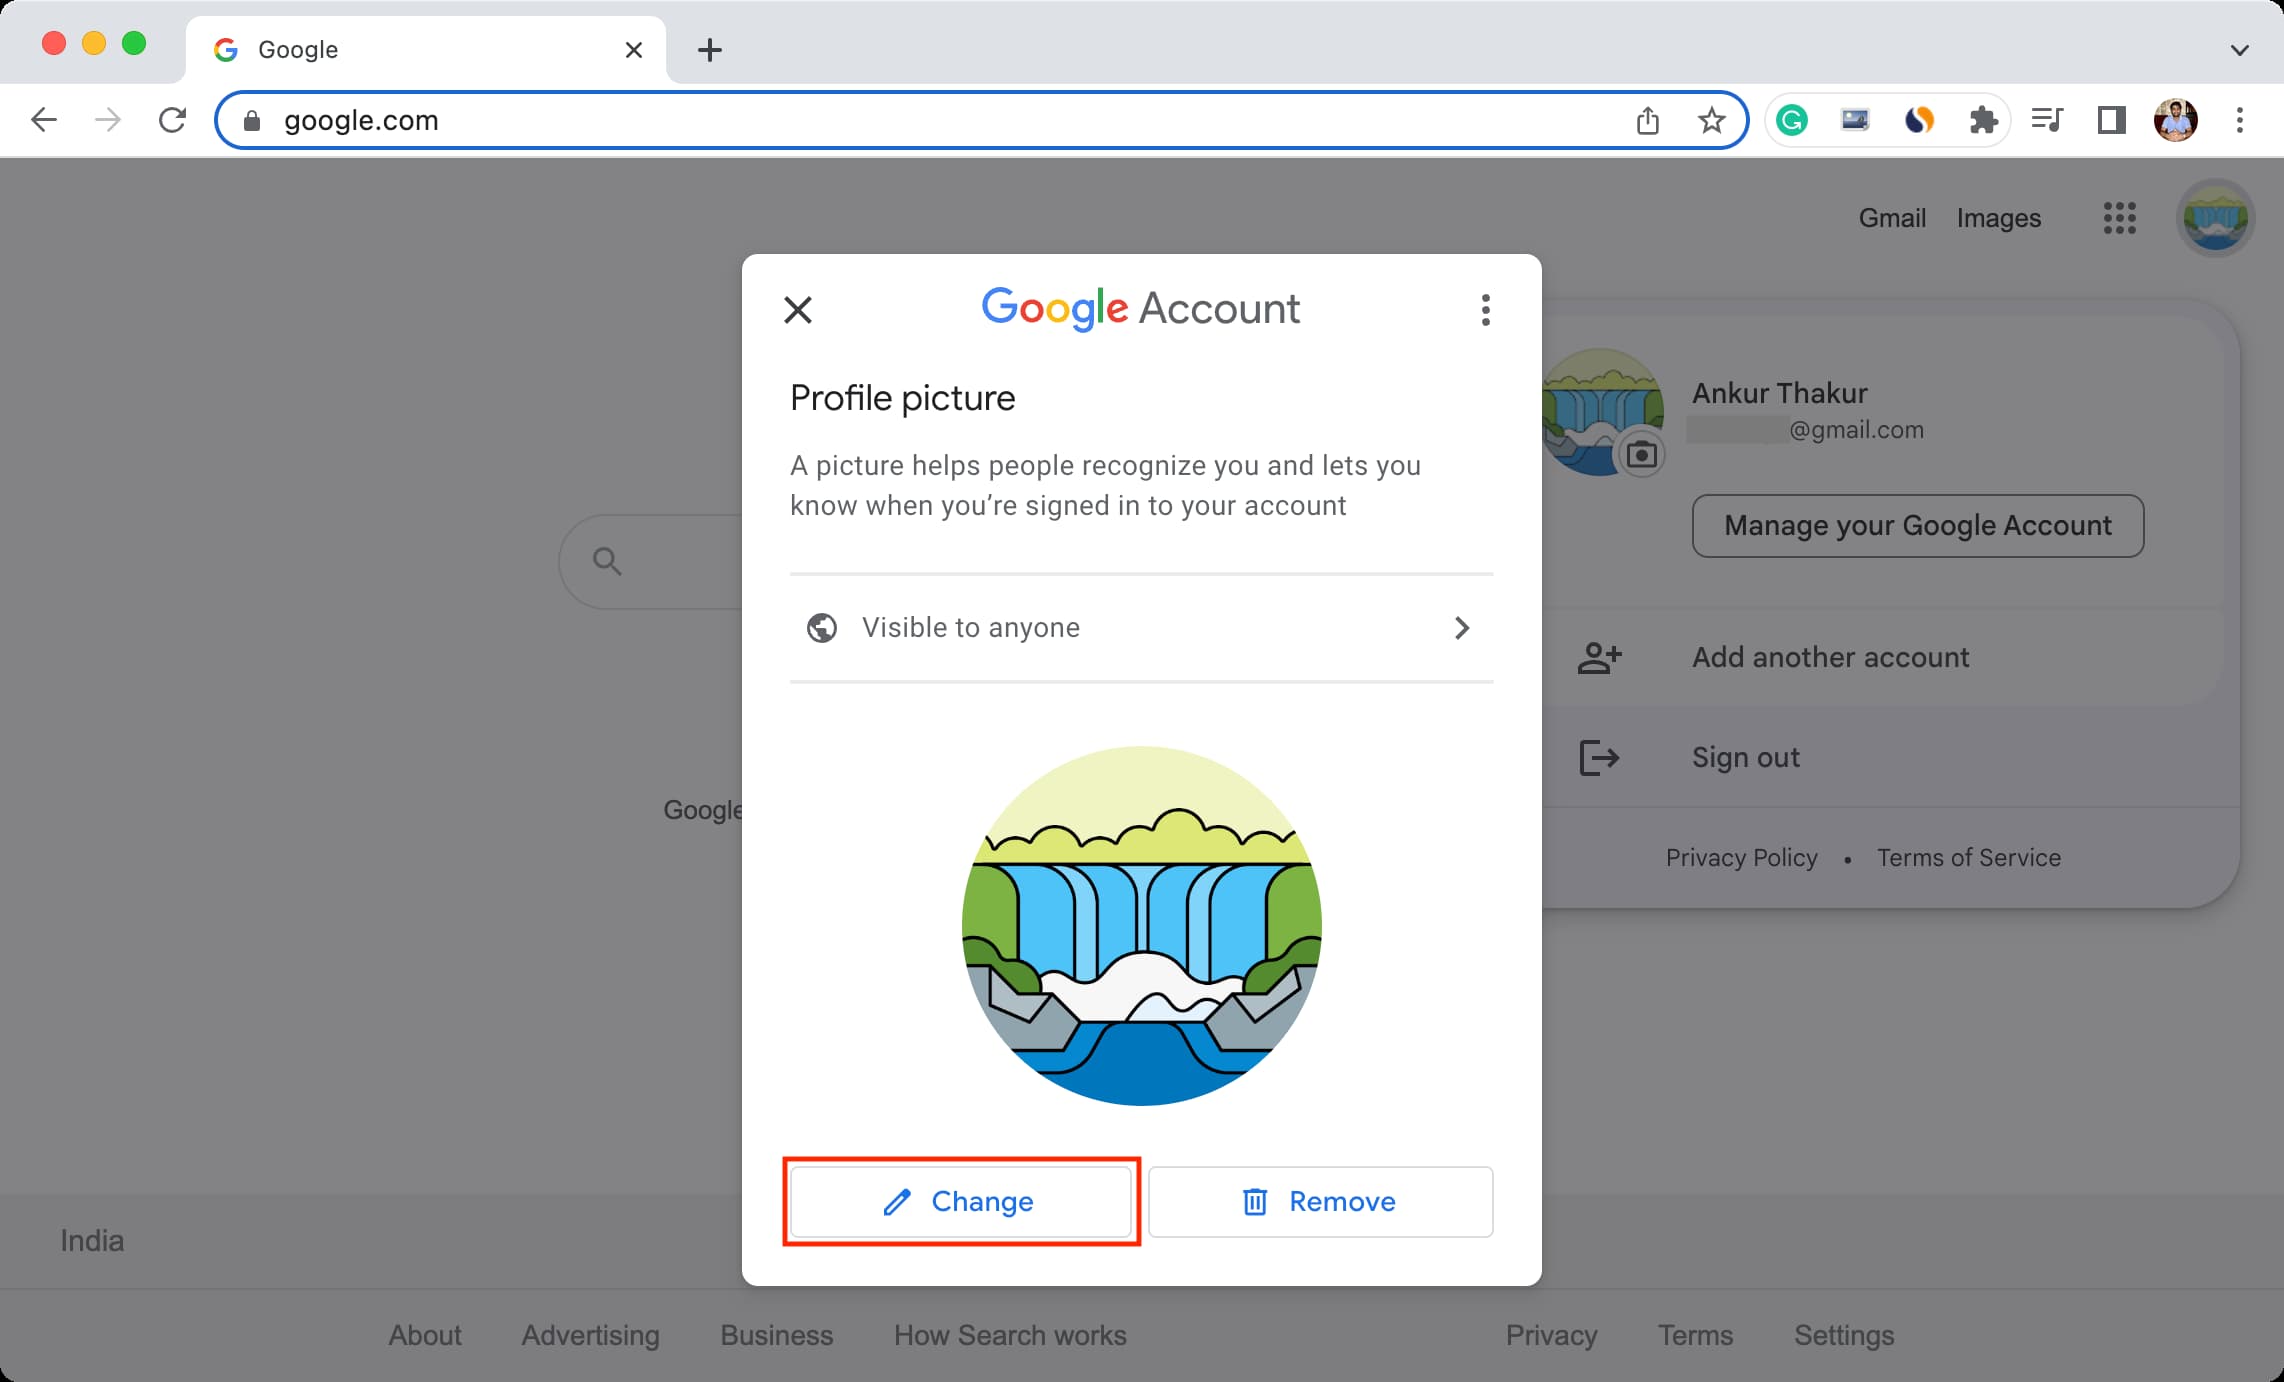 Click Change to use a different profile picture for your Google account